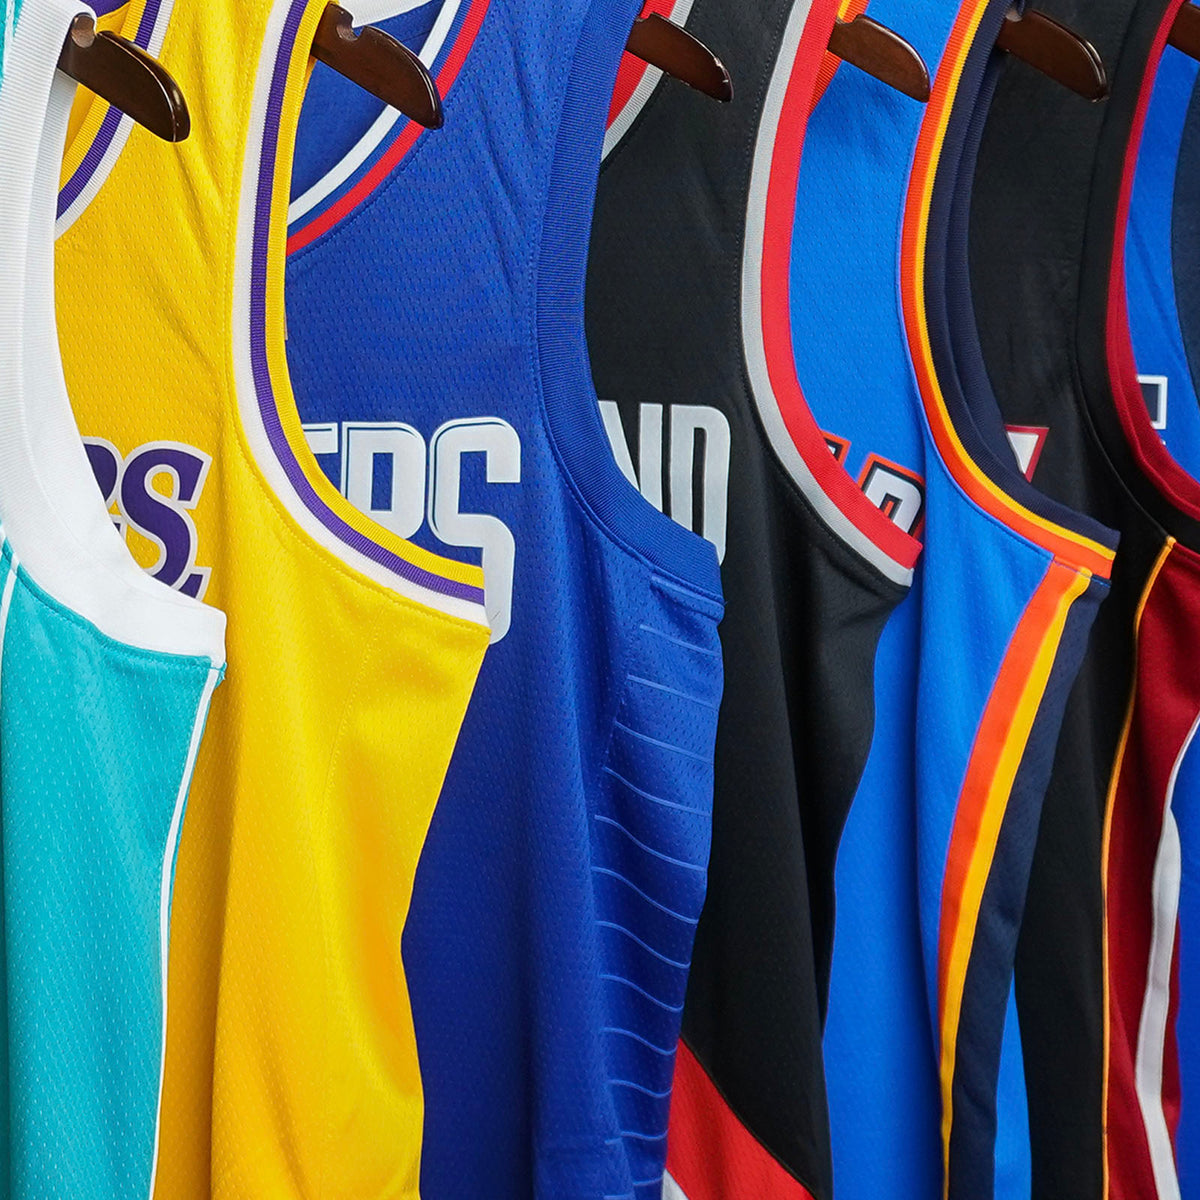 Paul George Jerseys, George Clippers Jersey, Shirts, Paul George Gear